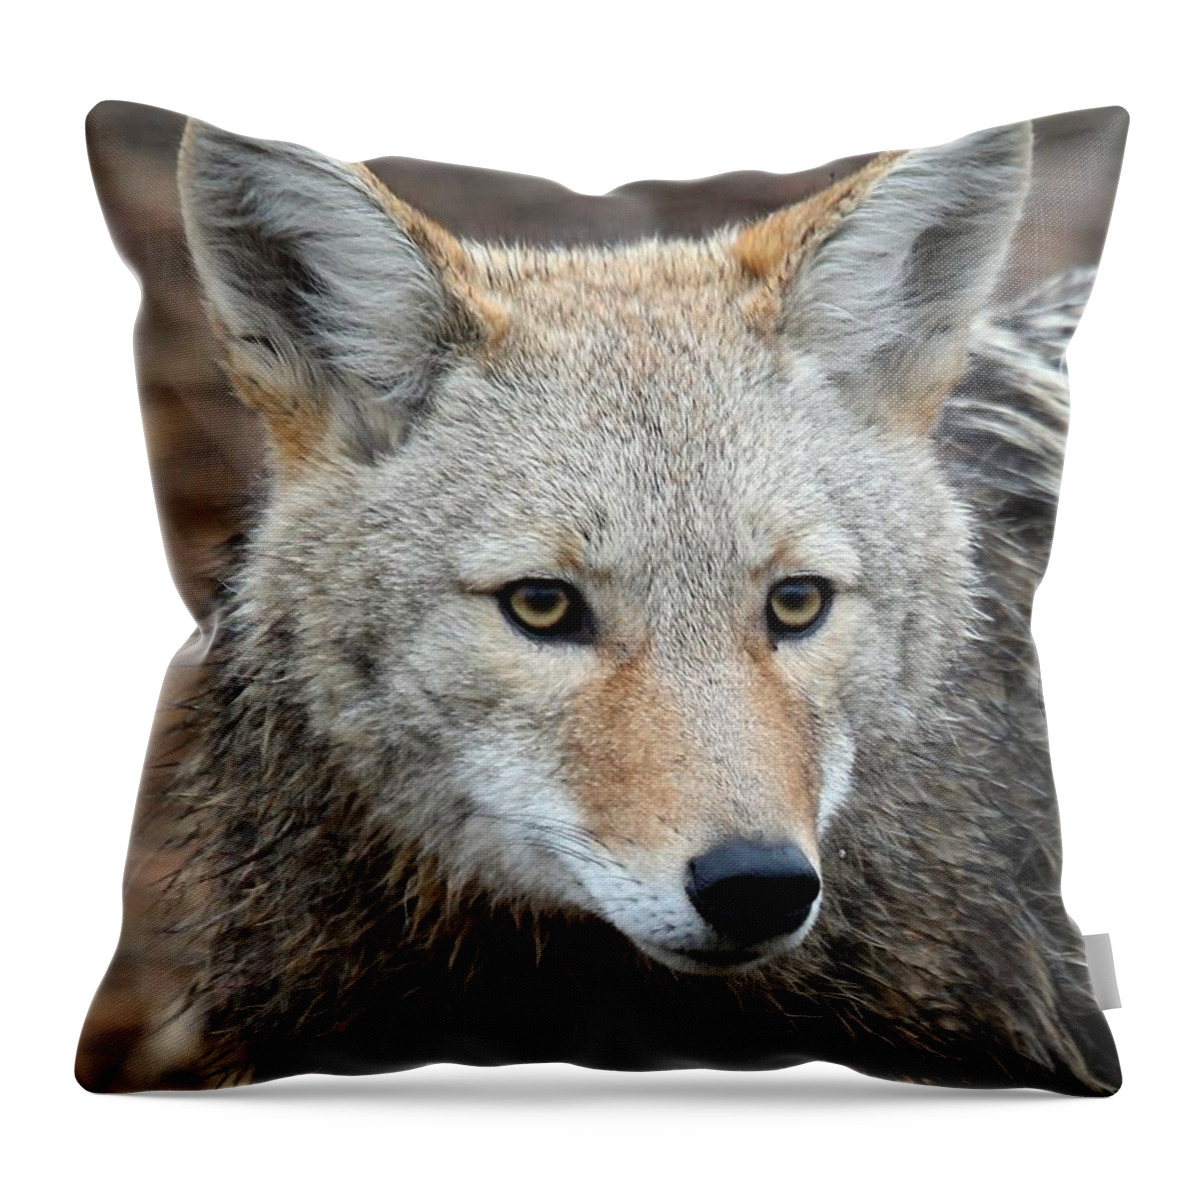 Coyotes Throw Pillow featuring the photograph Coyote by Athena Mckinzie